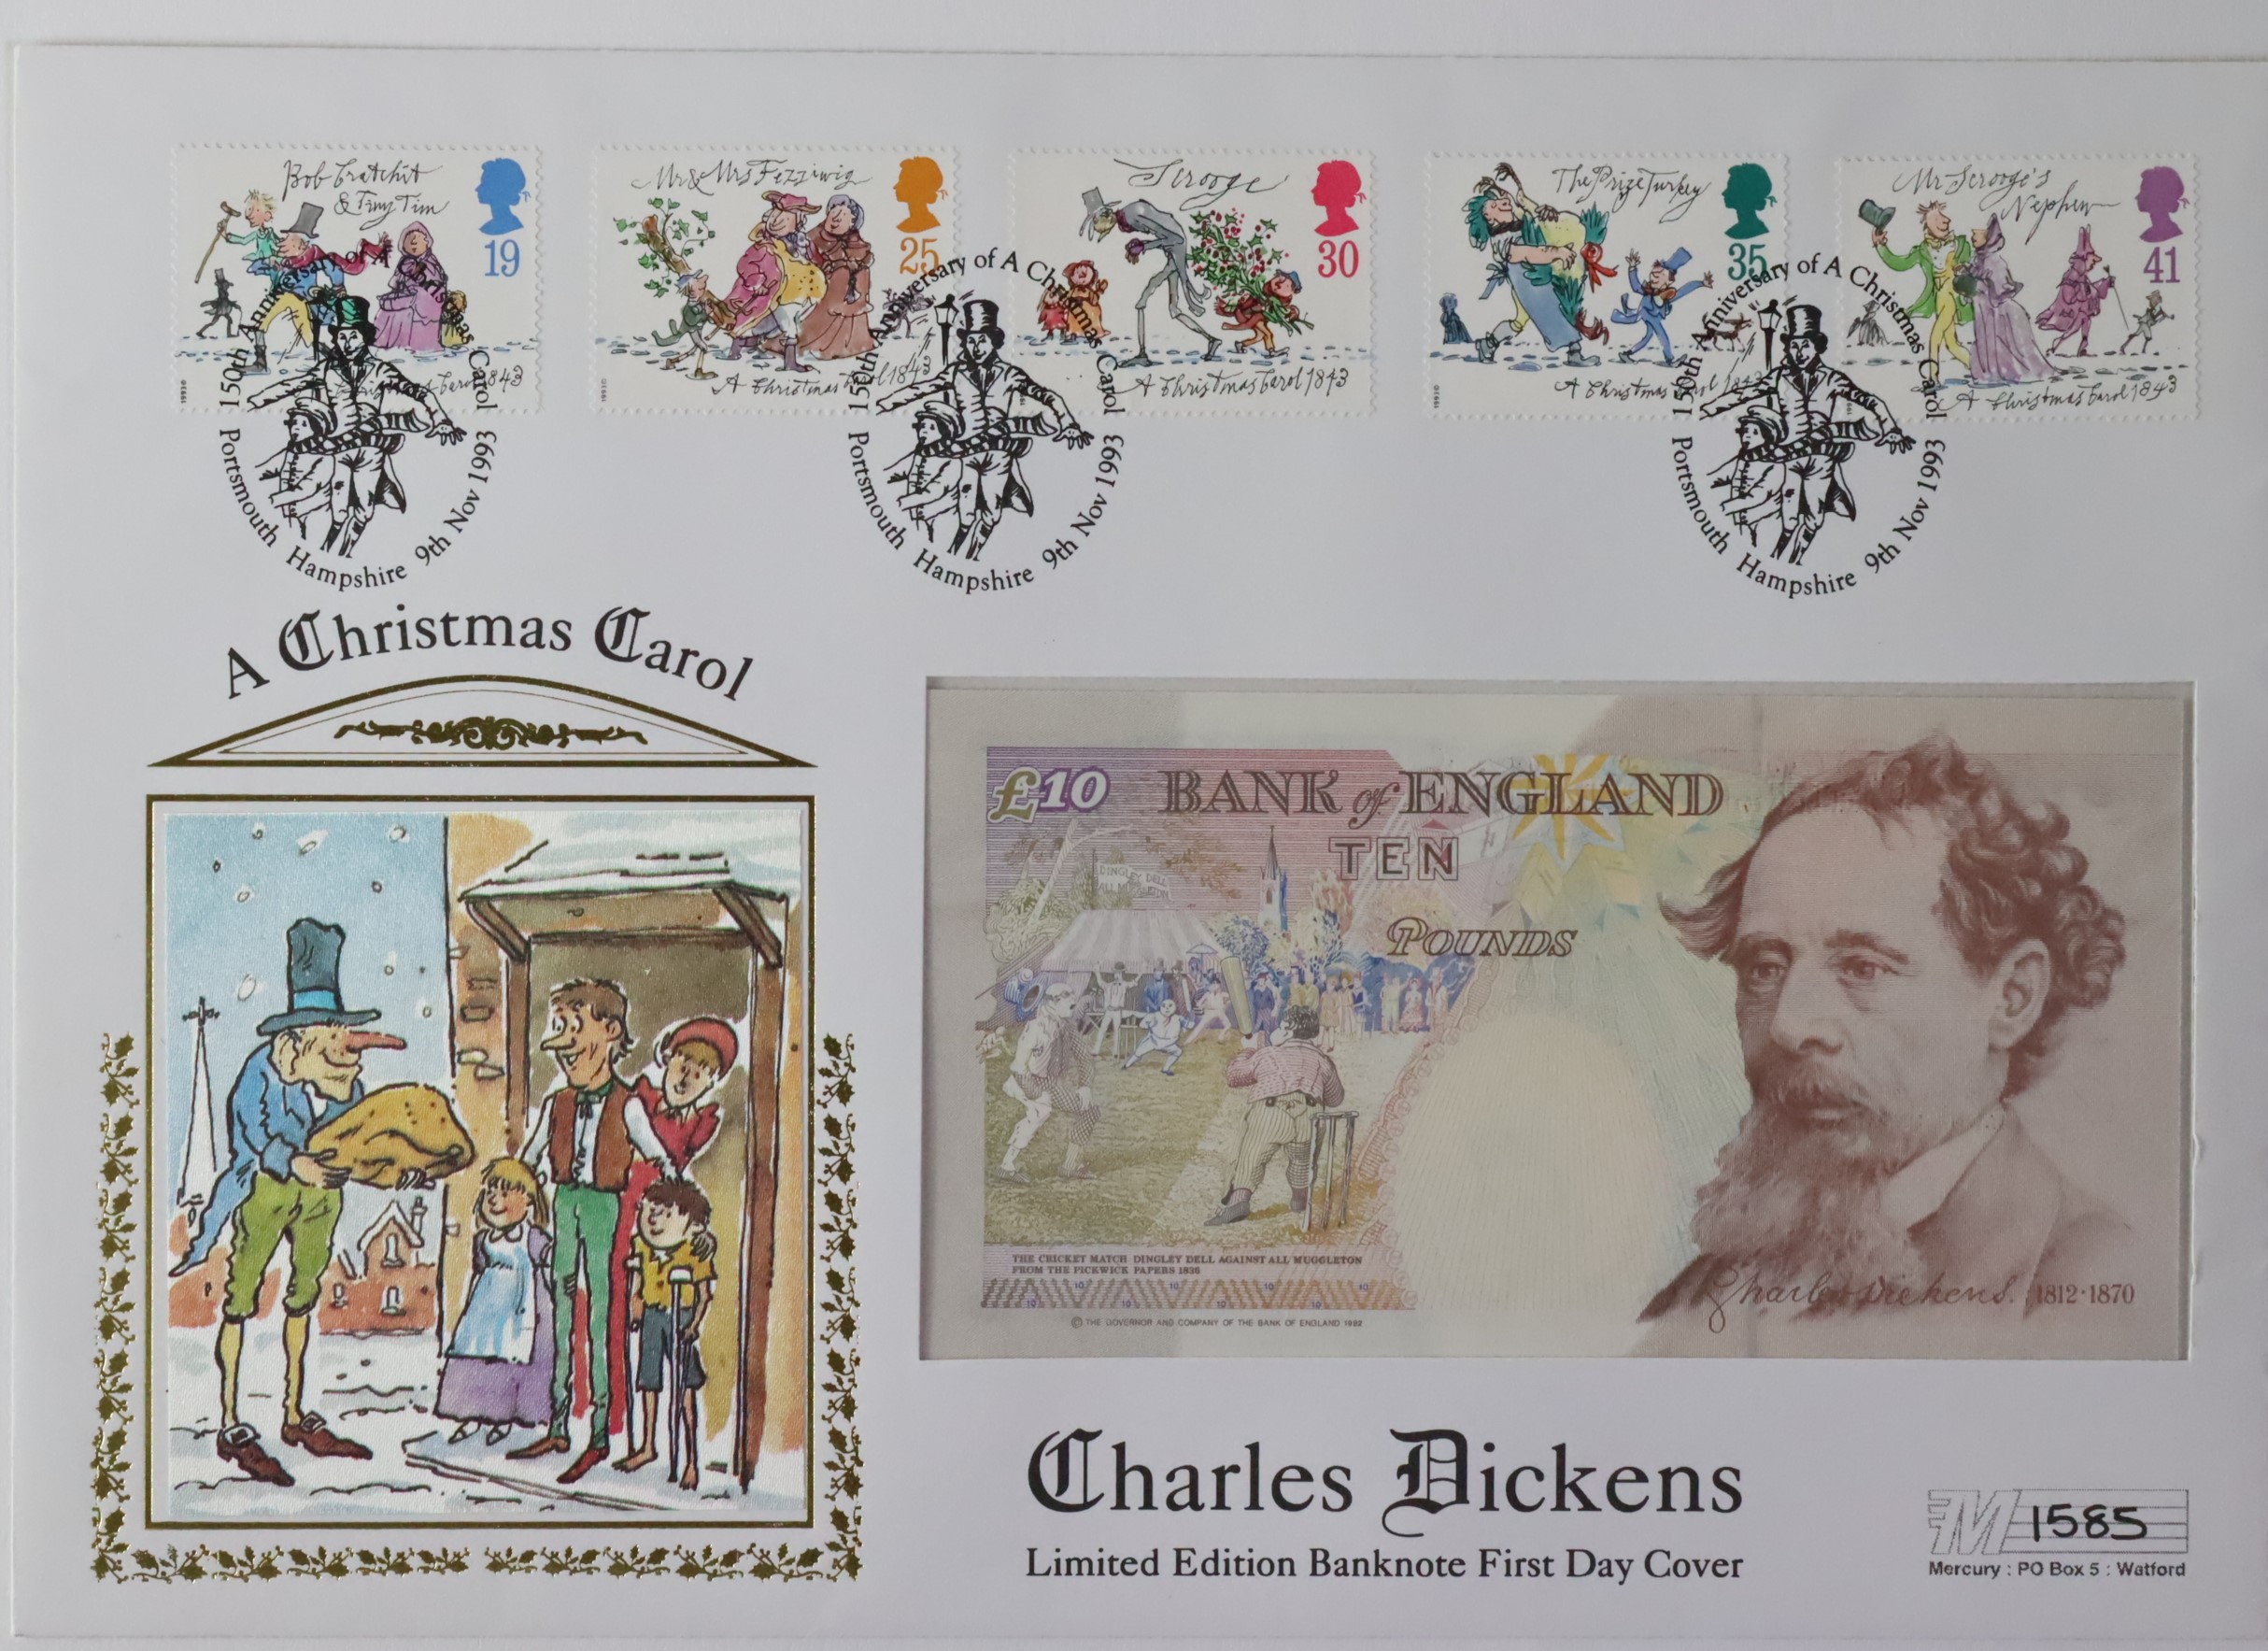 Kentfield First Day Covers (3), 10 Pounds signed Kentfield, Charles Dickens 'A Christmas Carol' - Image 4 of 7